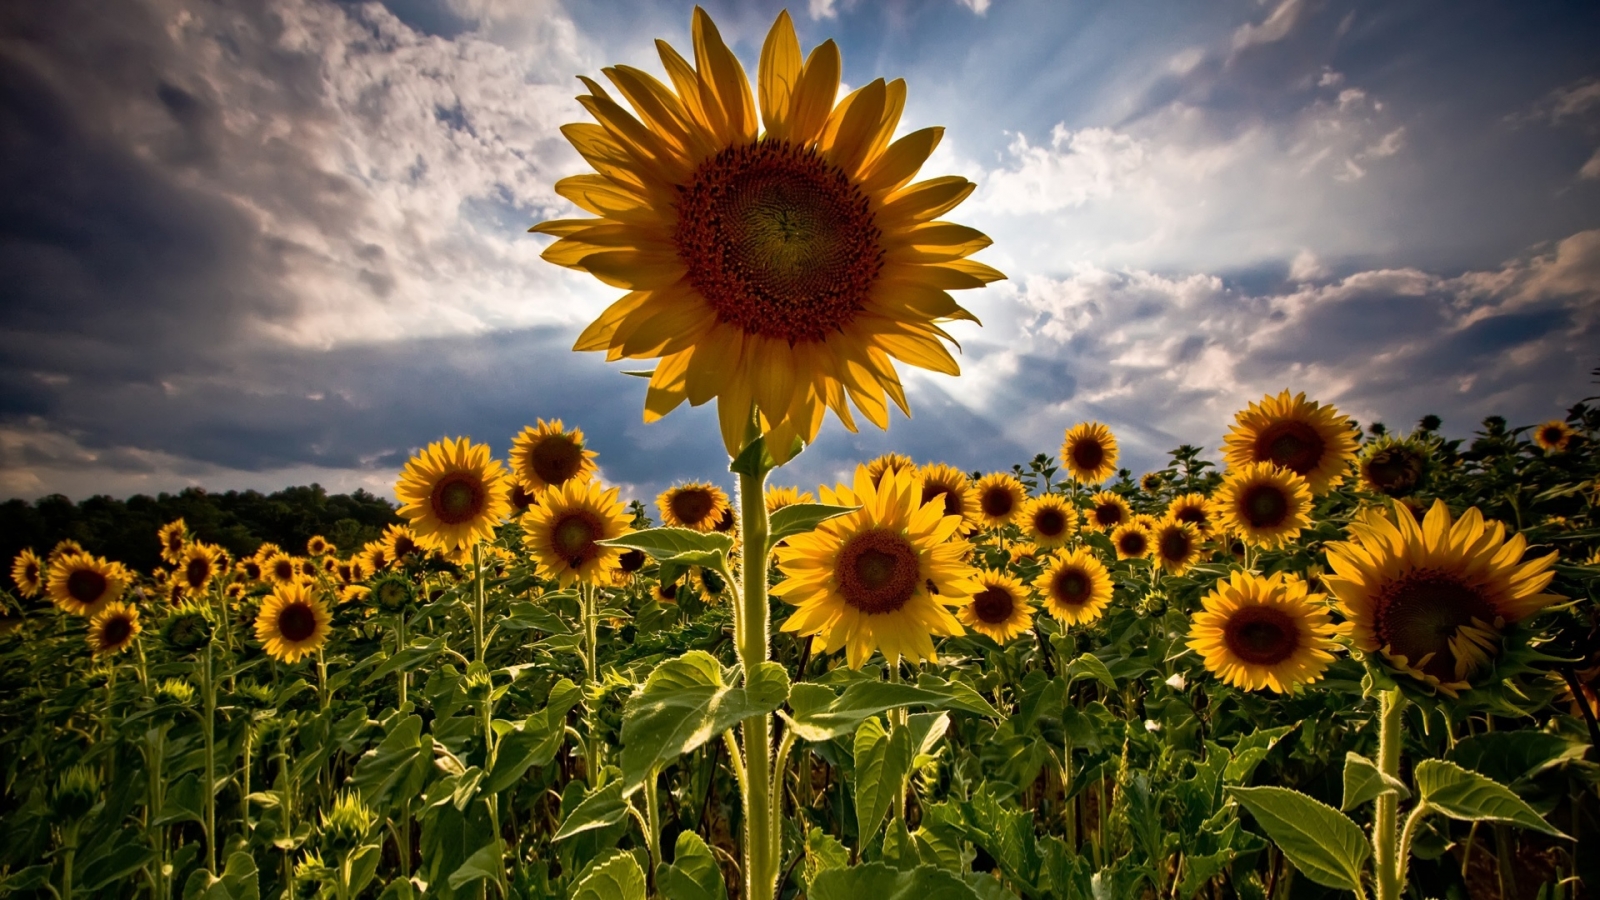 Amazing Sunflowers for 1600 x 900 HDTV resolution